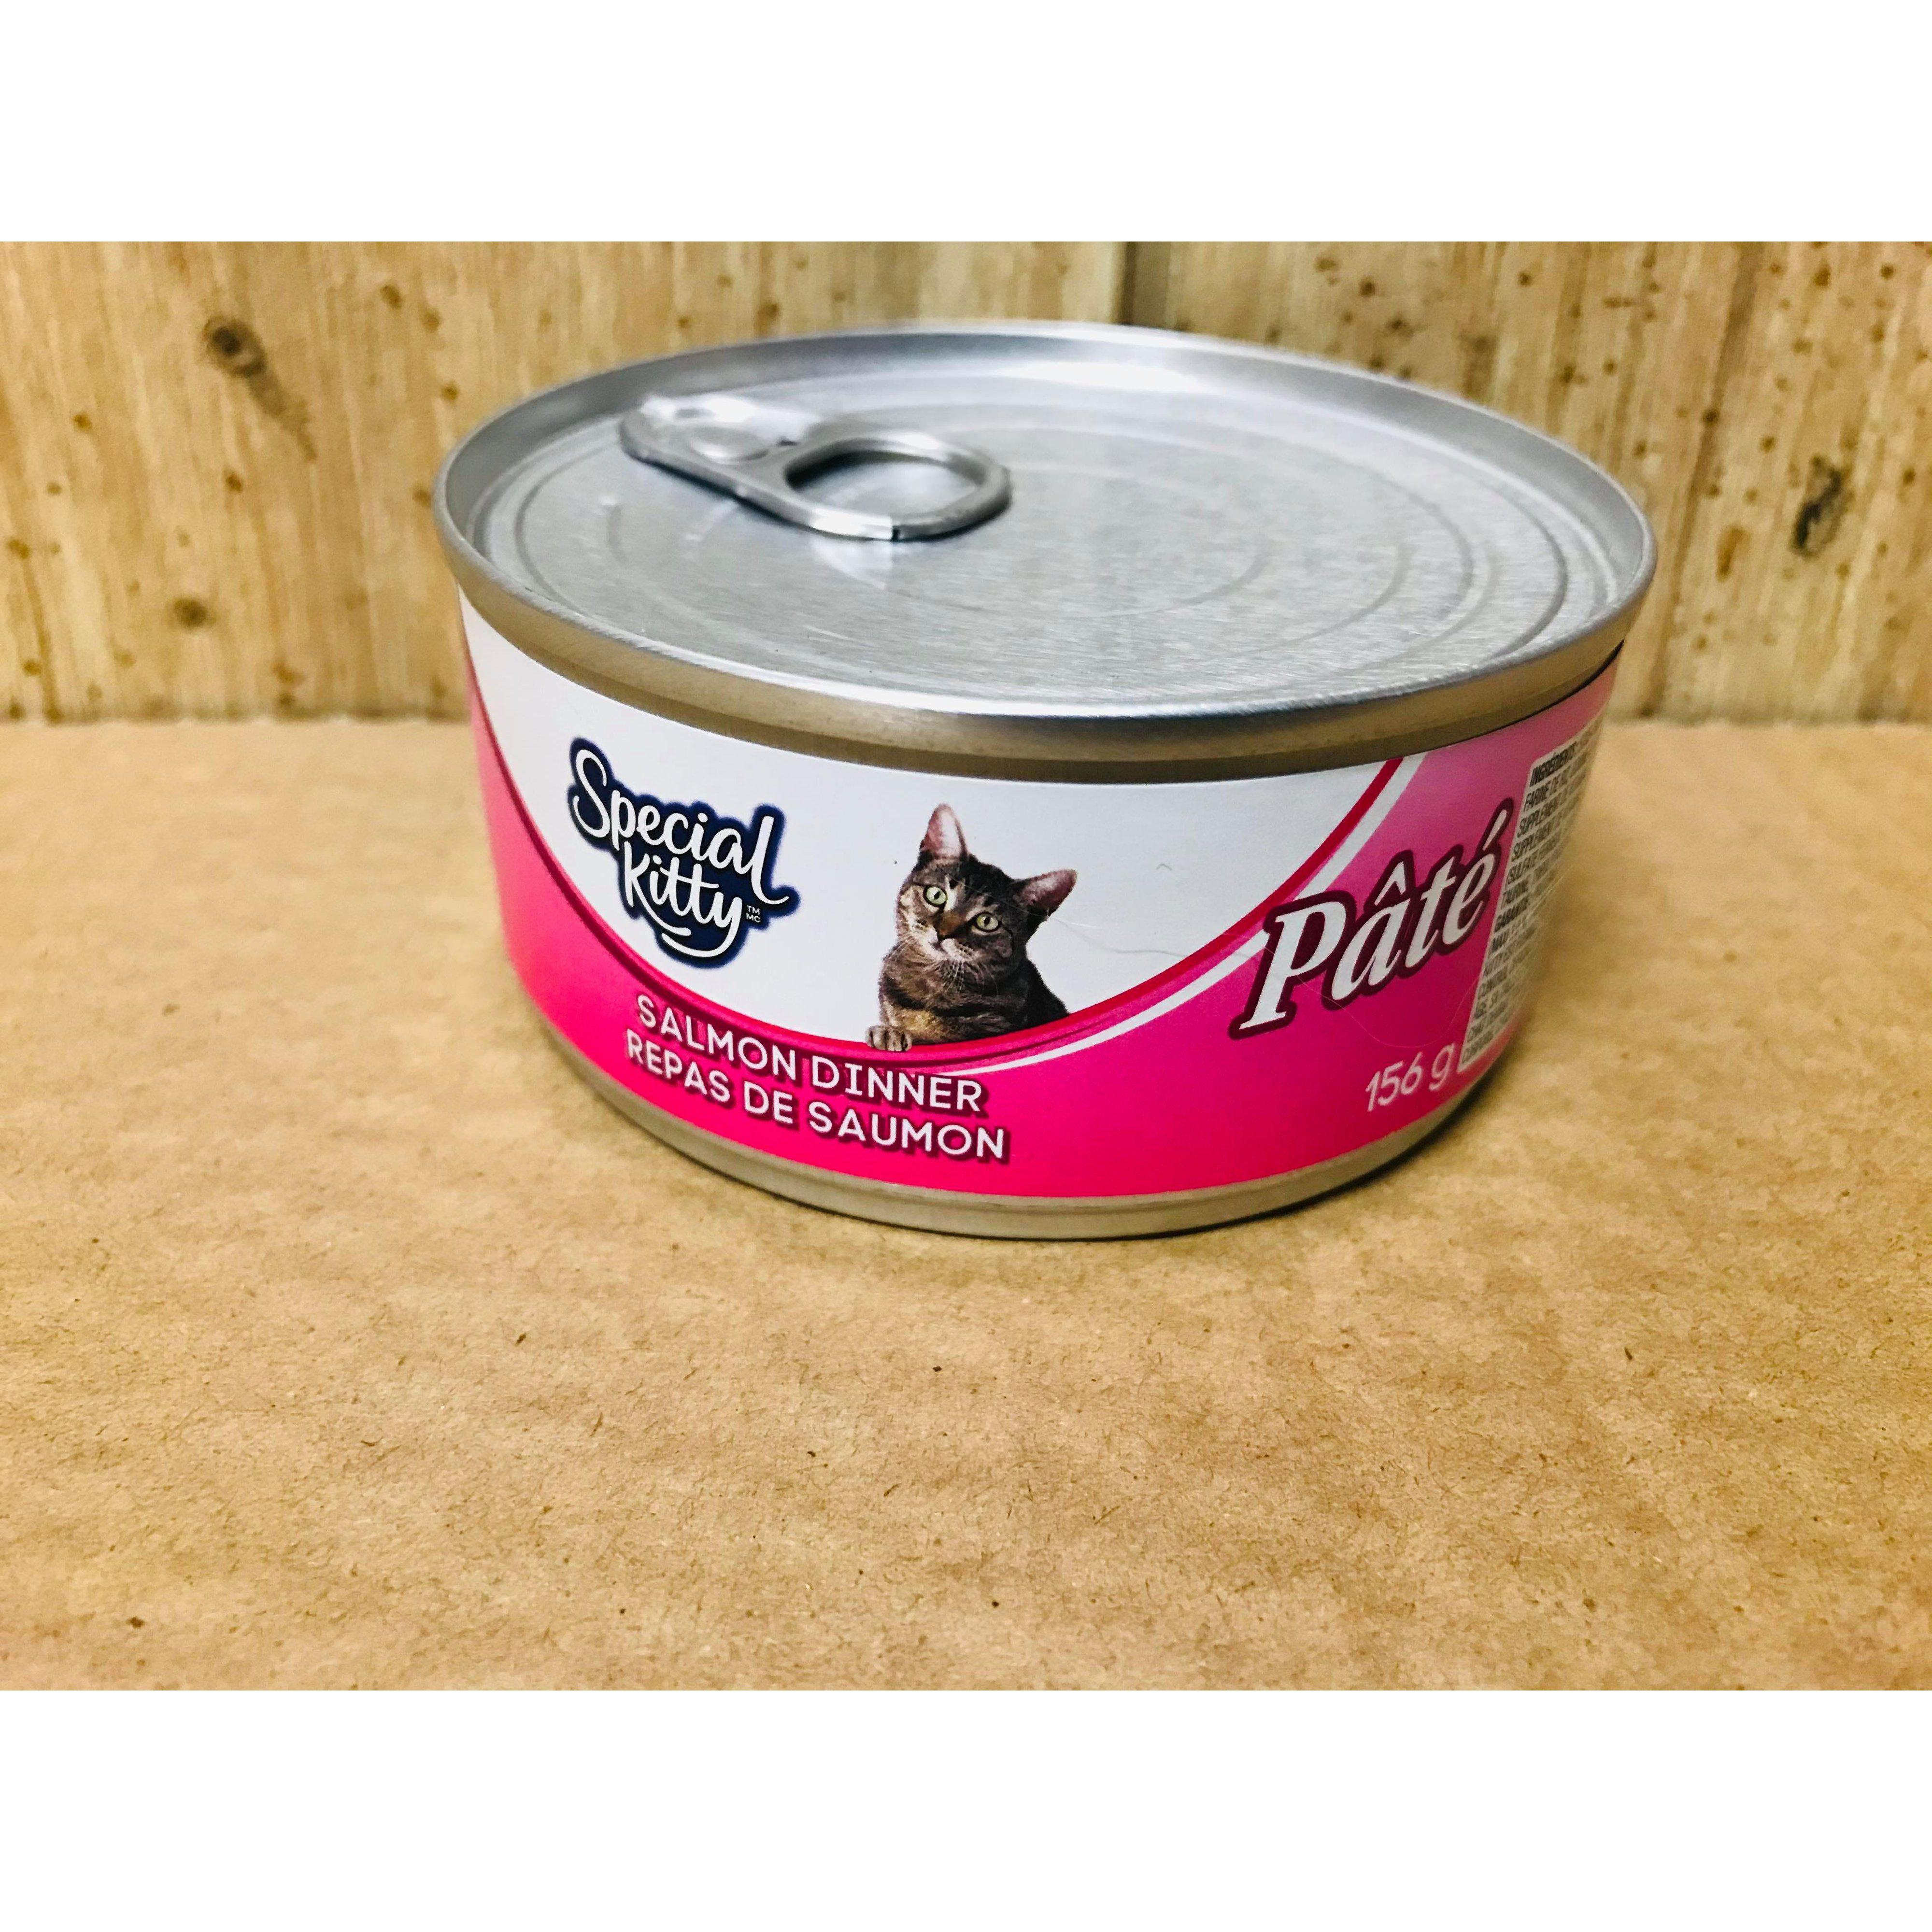 Special Kitty, Pate, Salmon Dinner Wet Cat Food 156G